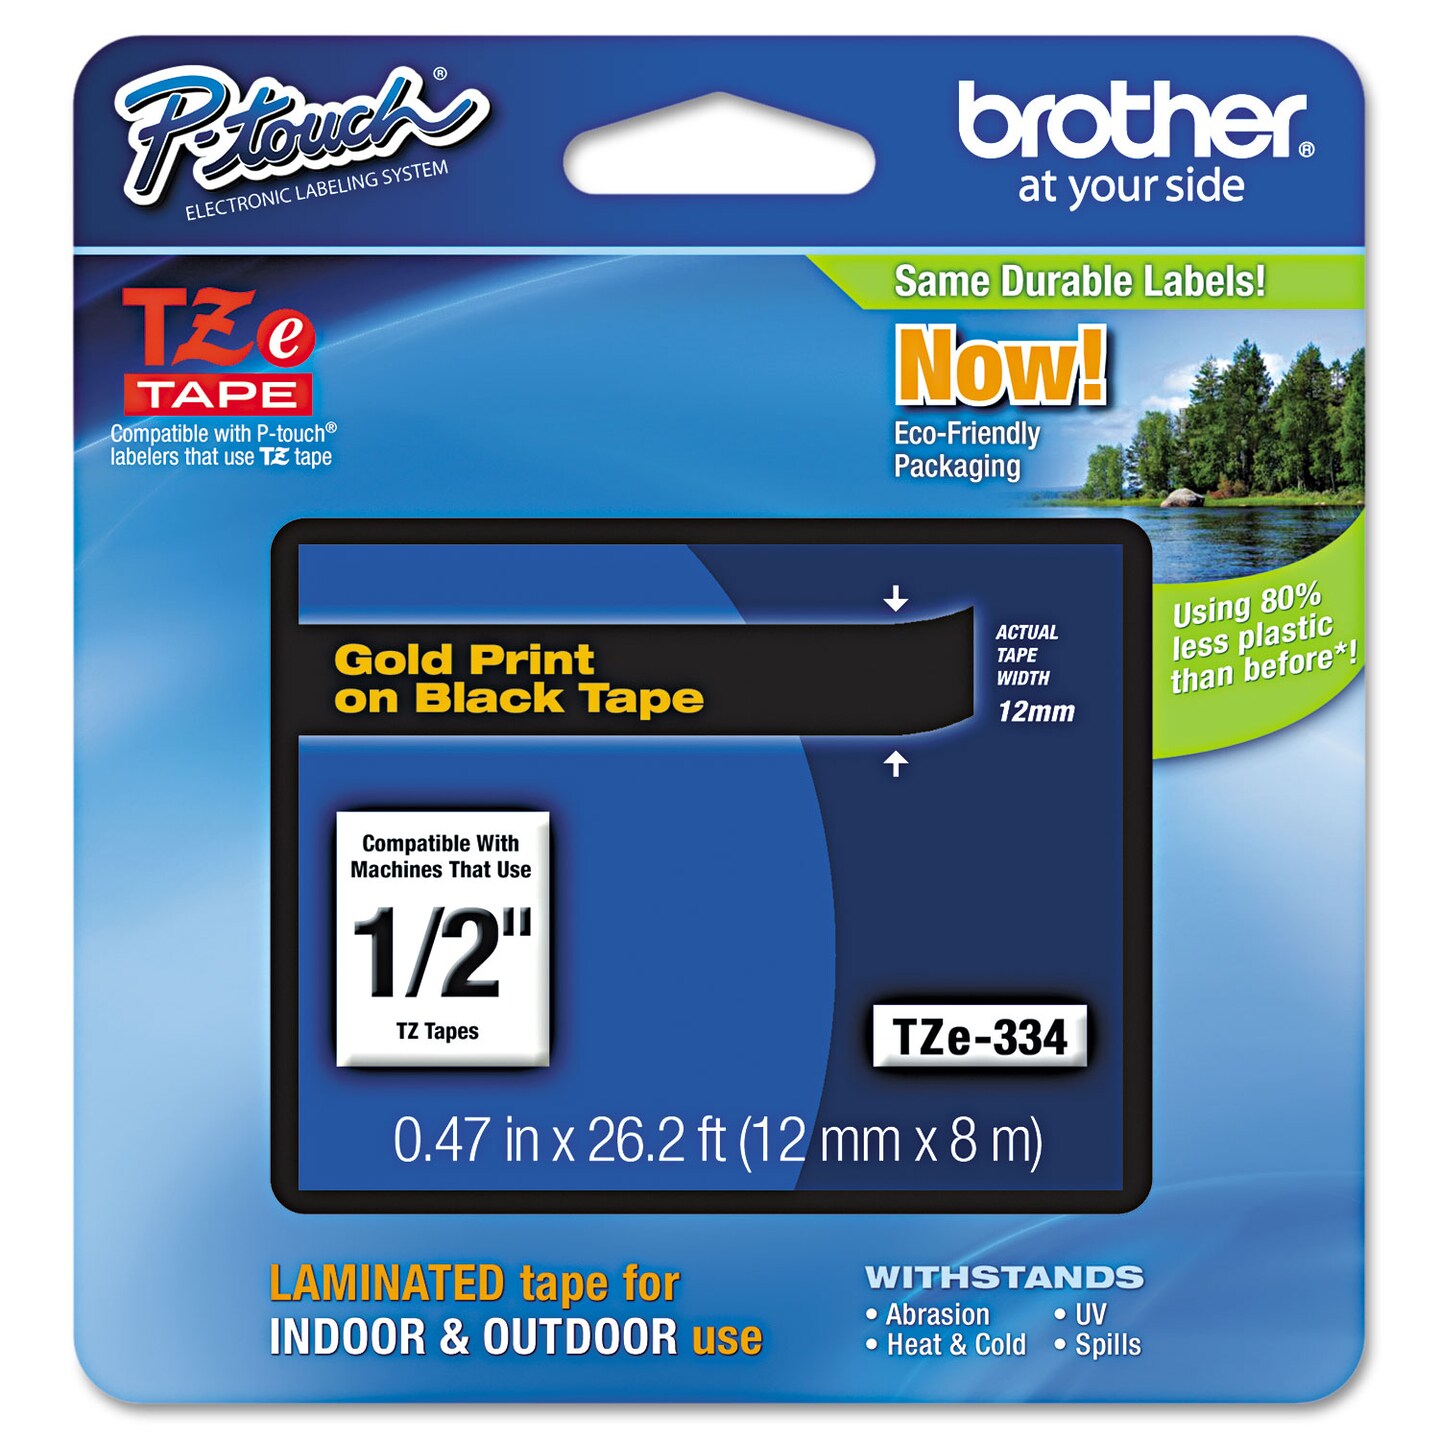 Brother TZe Standard Adhesive Laminated Labeling Tape 0.47 x 26.2 ft Gold on Black